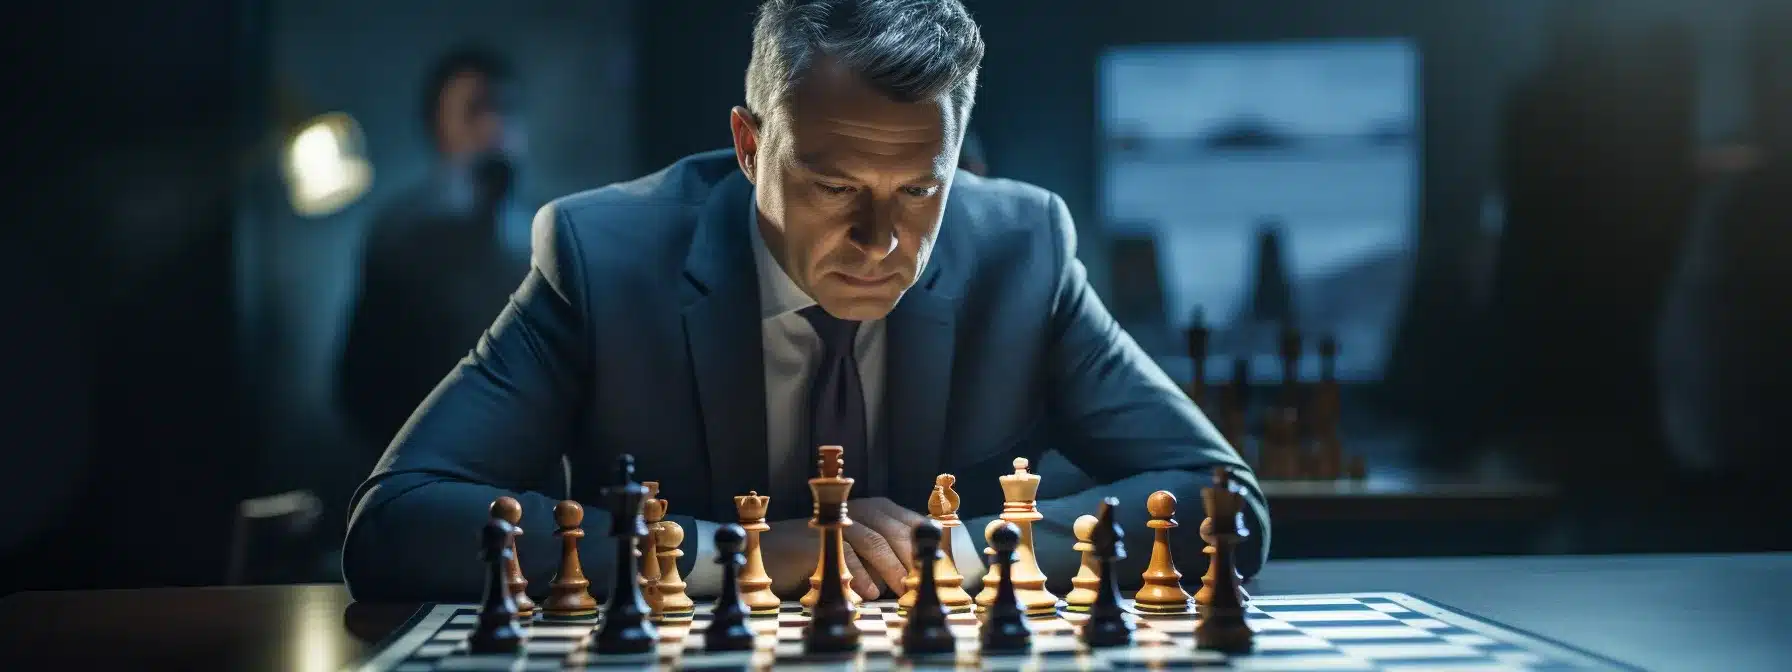 A Knight Strategizing His Next Move On A Chessboard, Surrounded By Competitors.